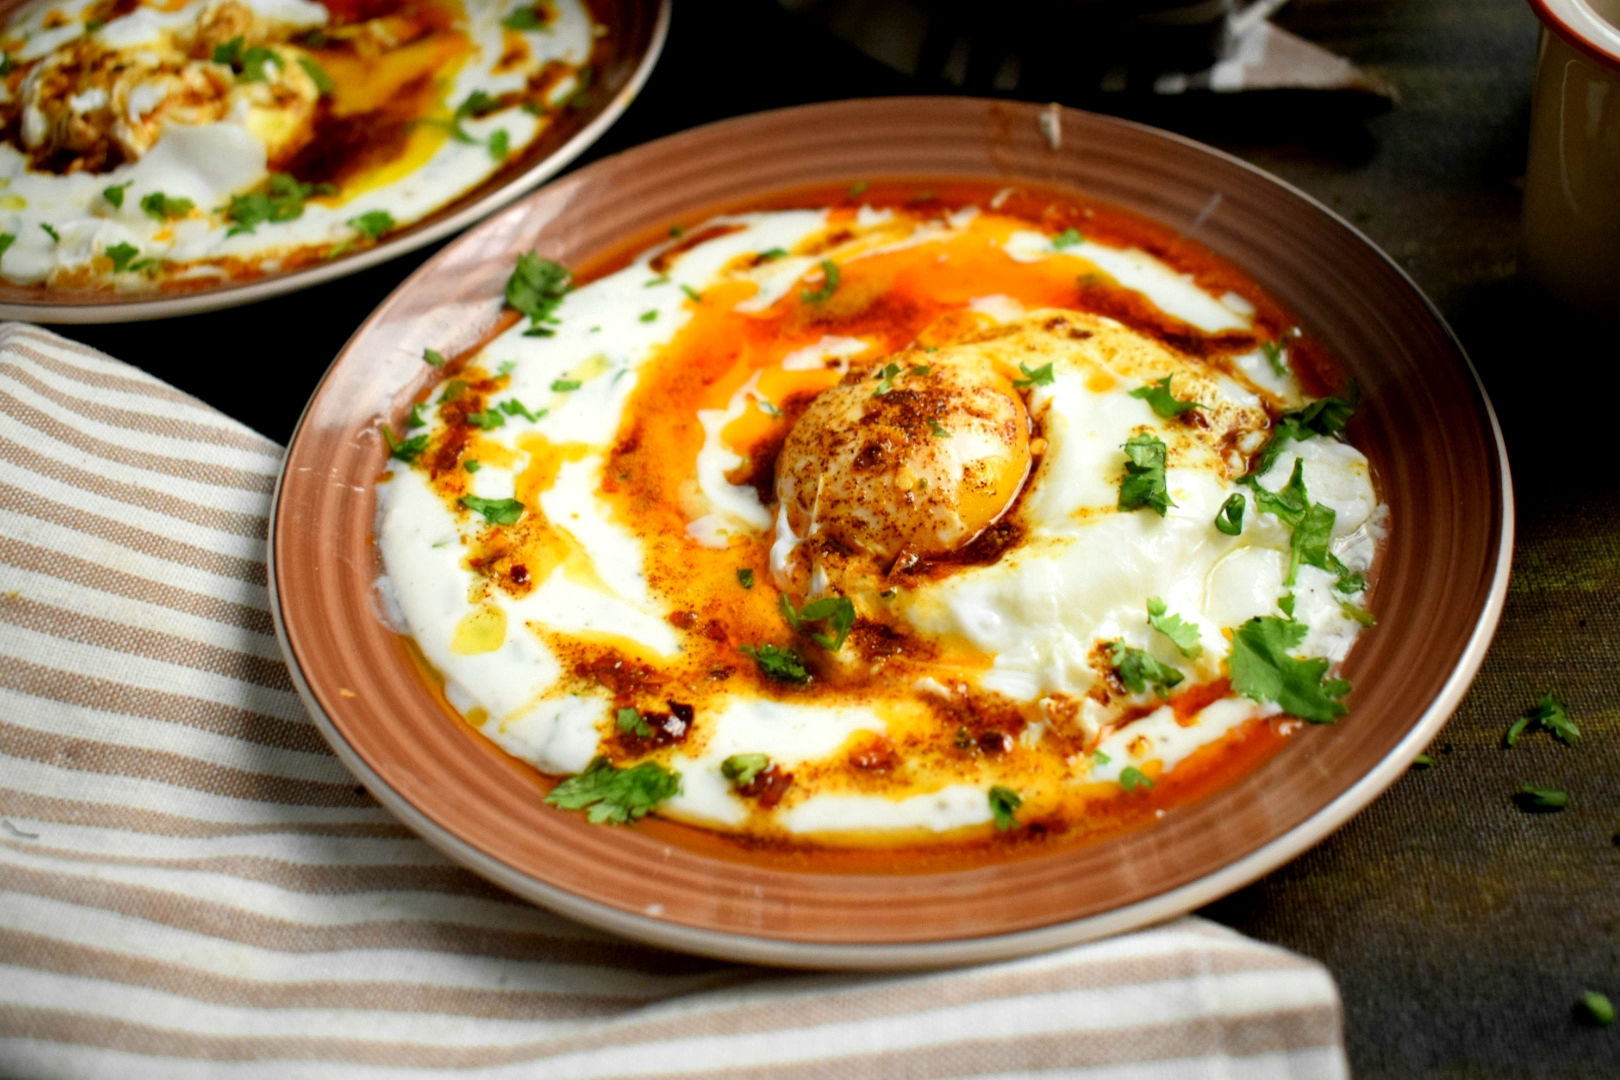 Recipe: Bring Turkey home this Monday with a Turkish breakfast of Cilbir